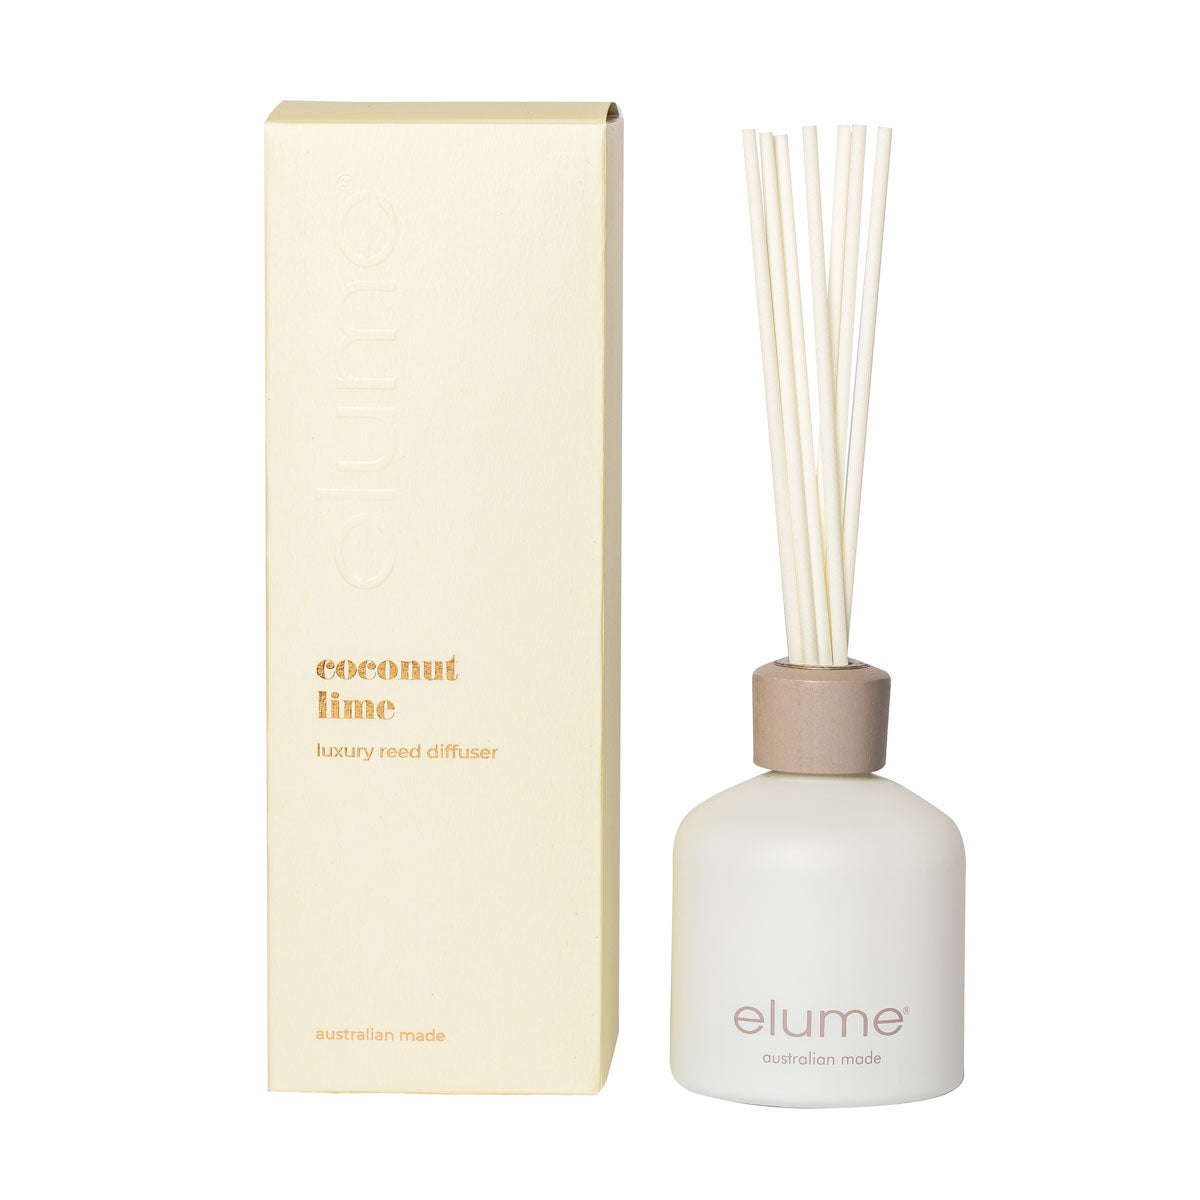 Coconut Lime: Elume Luxury Reed Diffuser